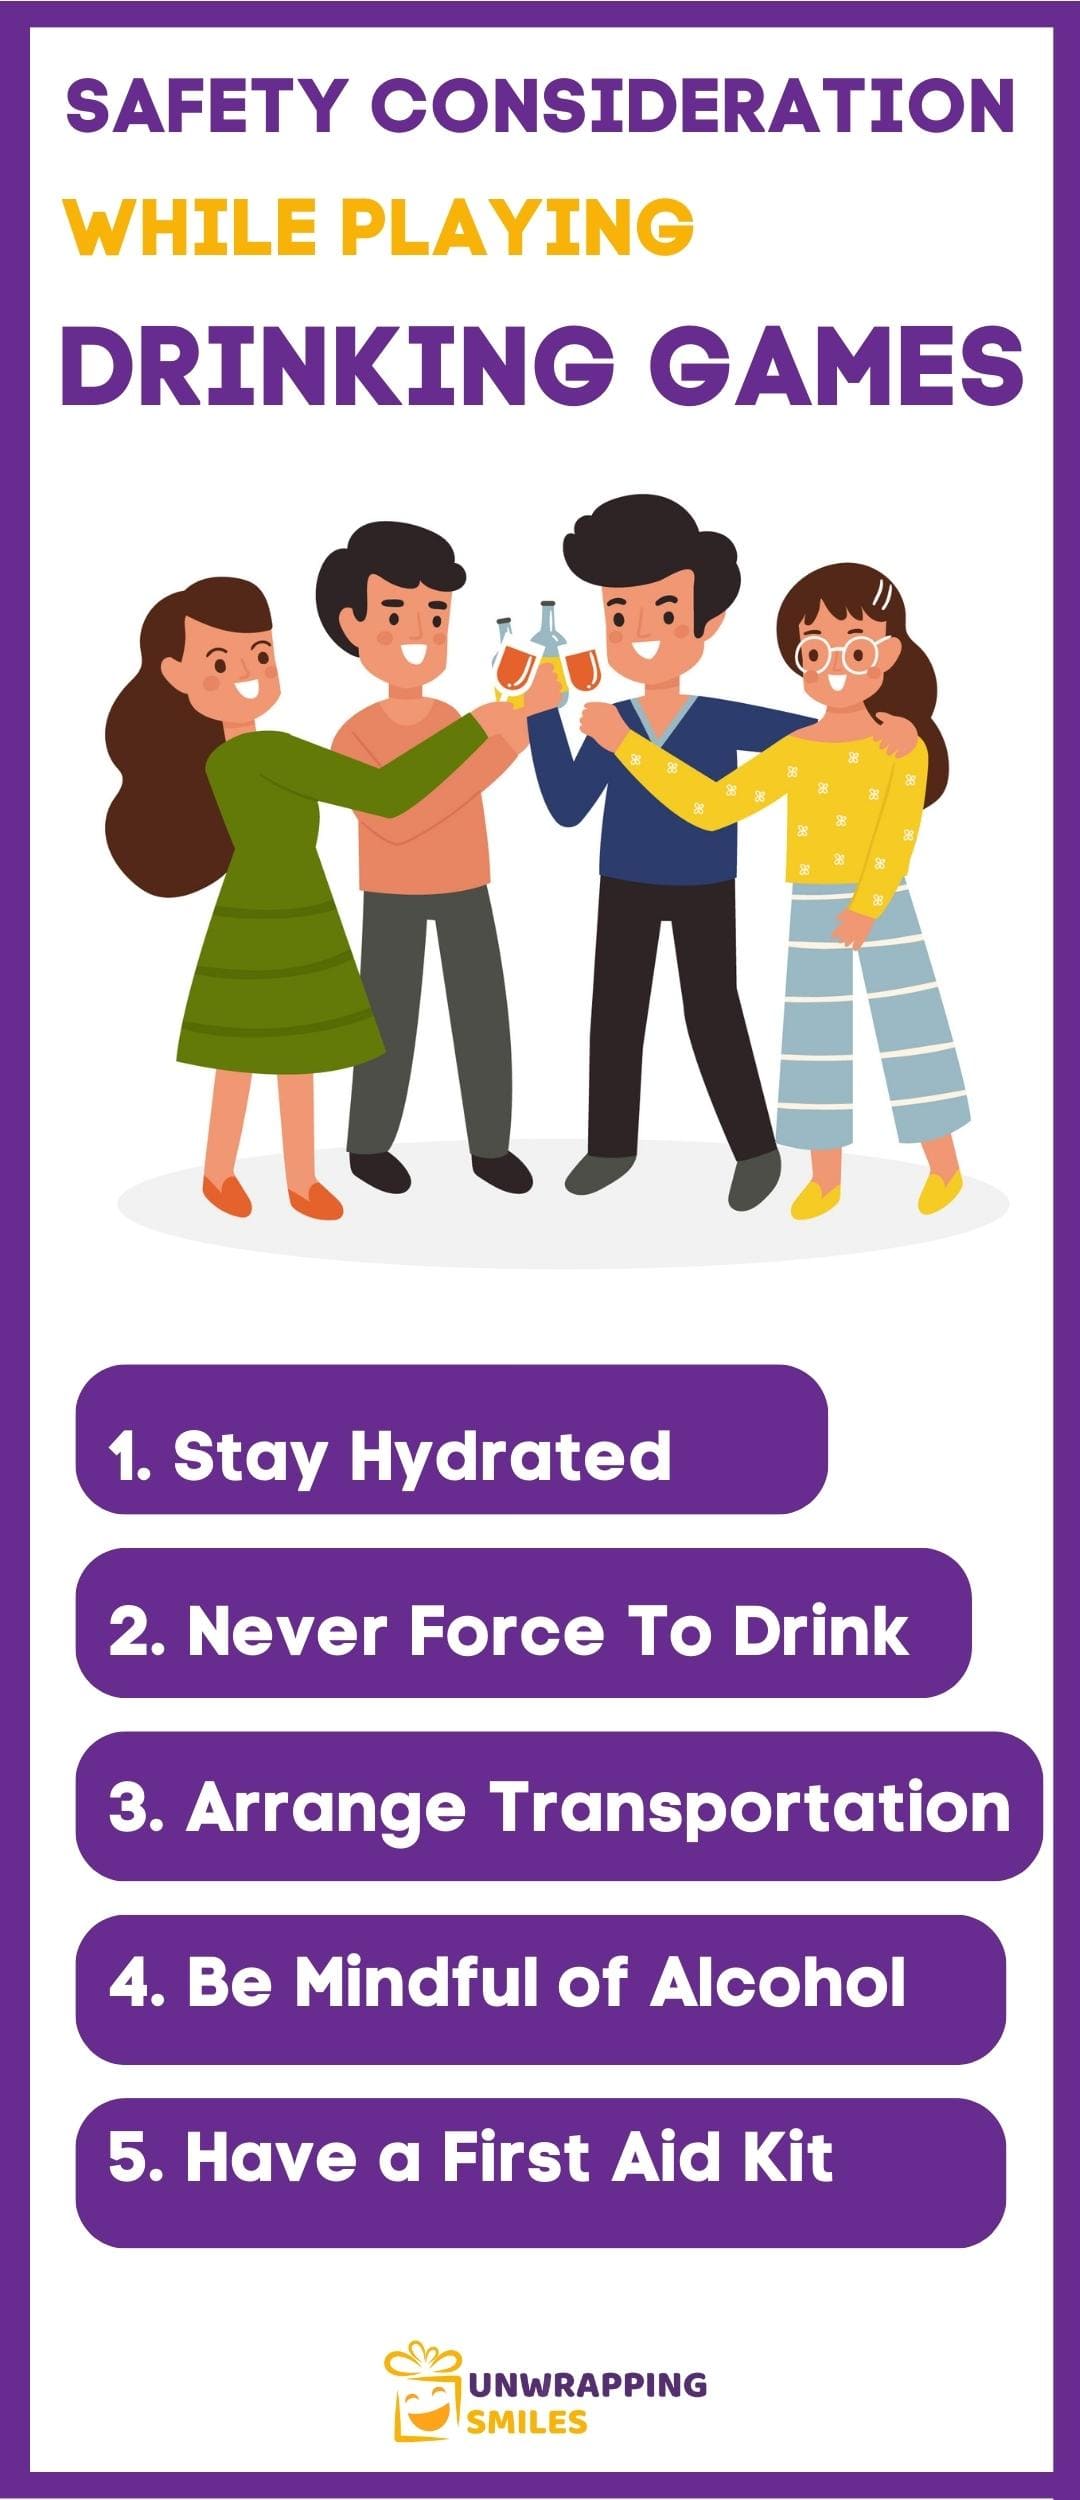 Safety Considerations While Playing Drinking Games